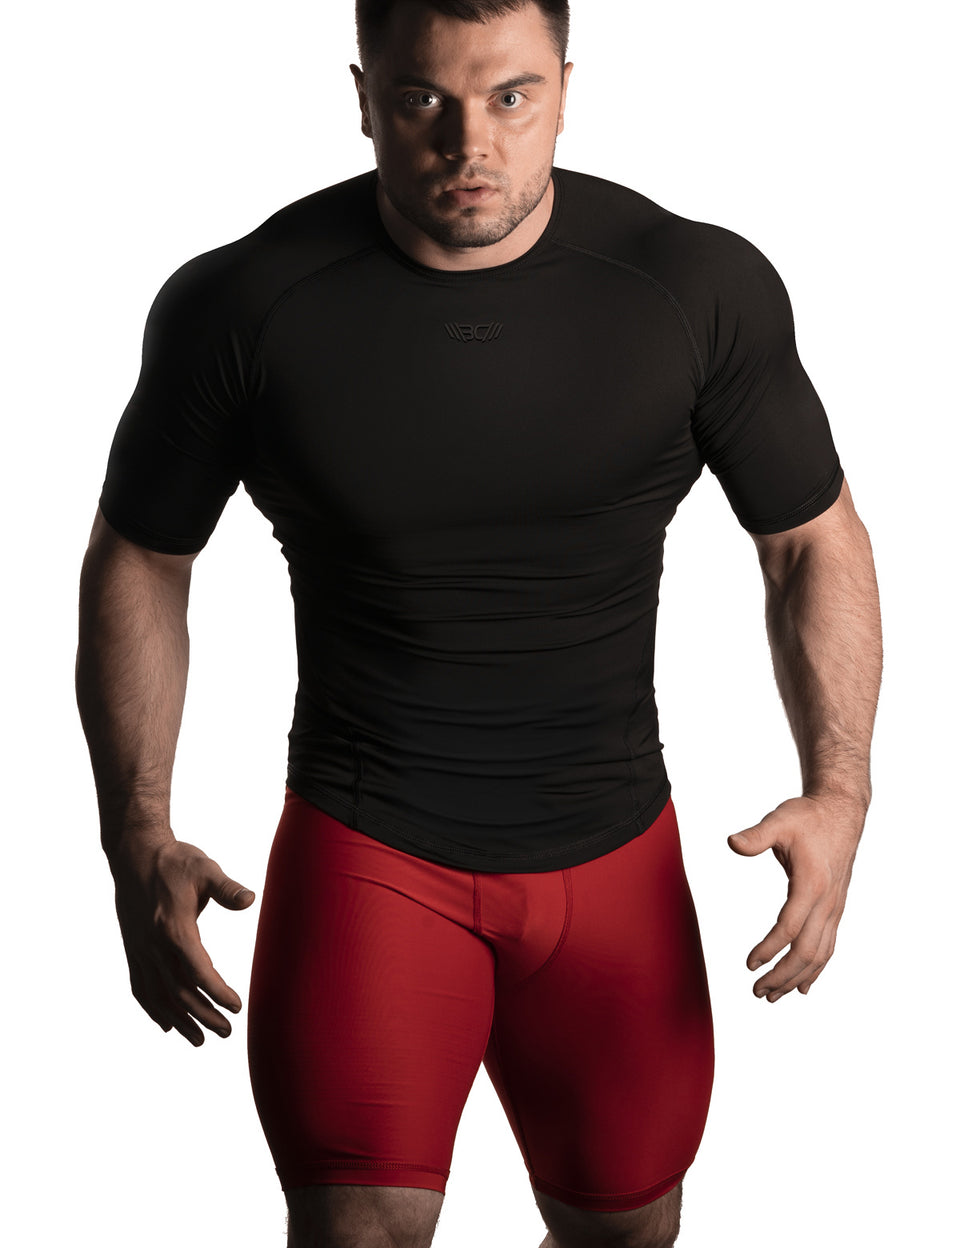 ➤ Men's Compression T-Shirt Price from $38 – Warm Body Mind TM